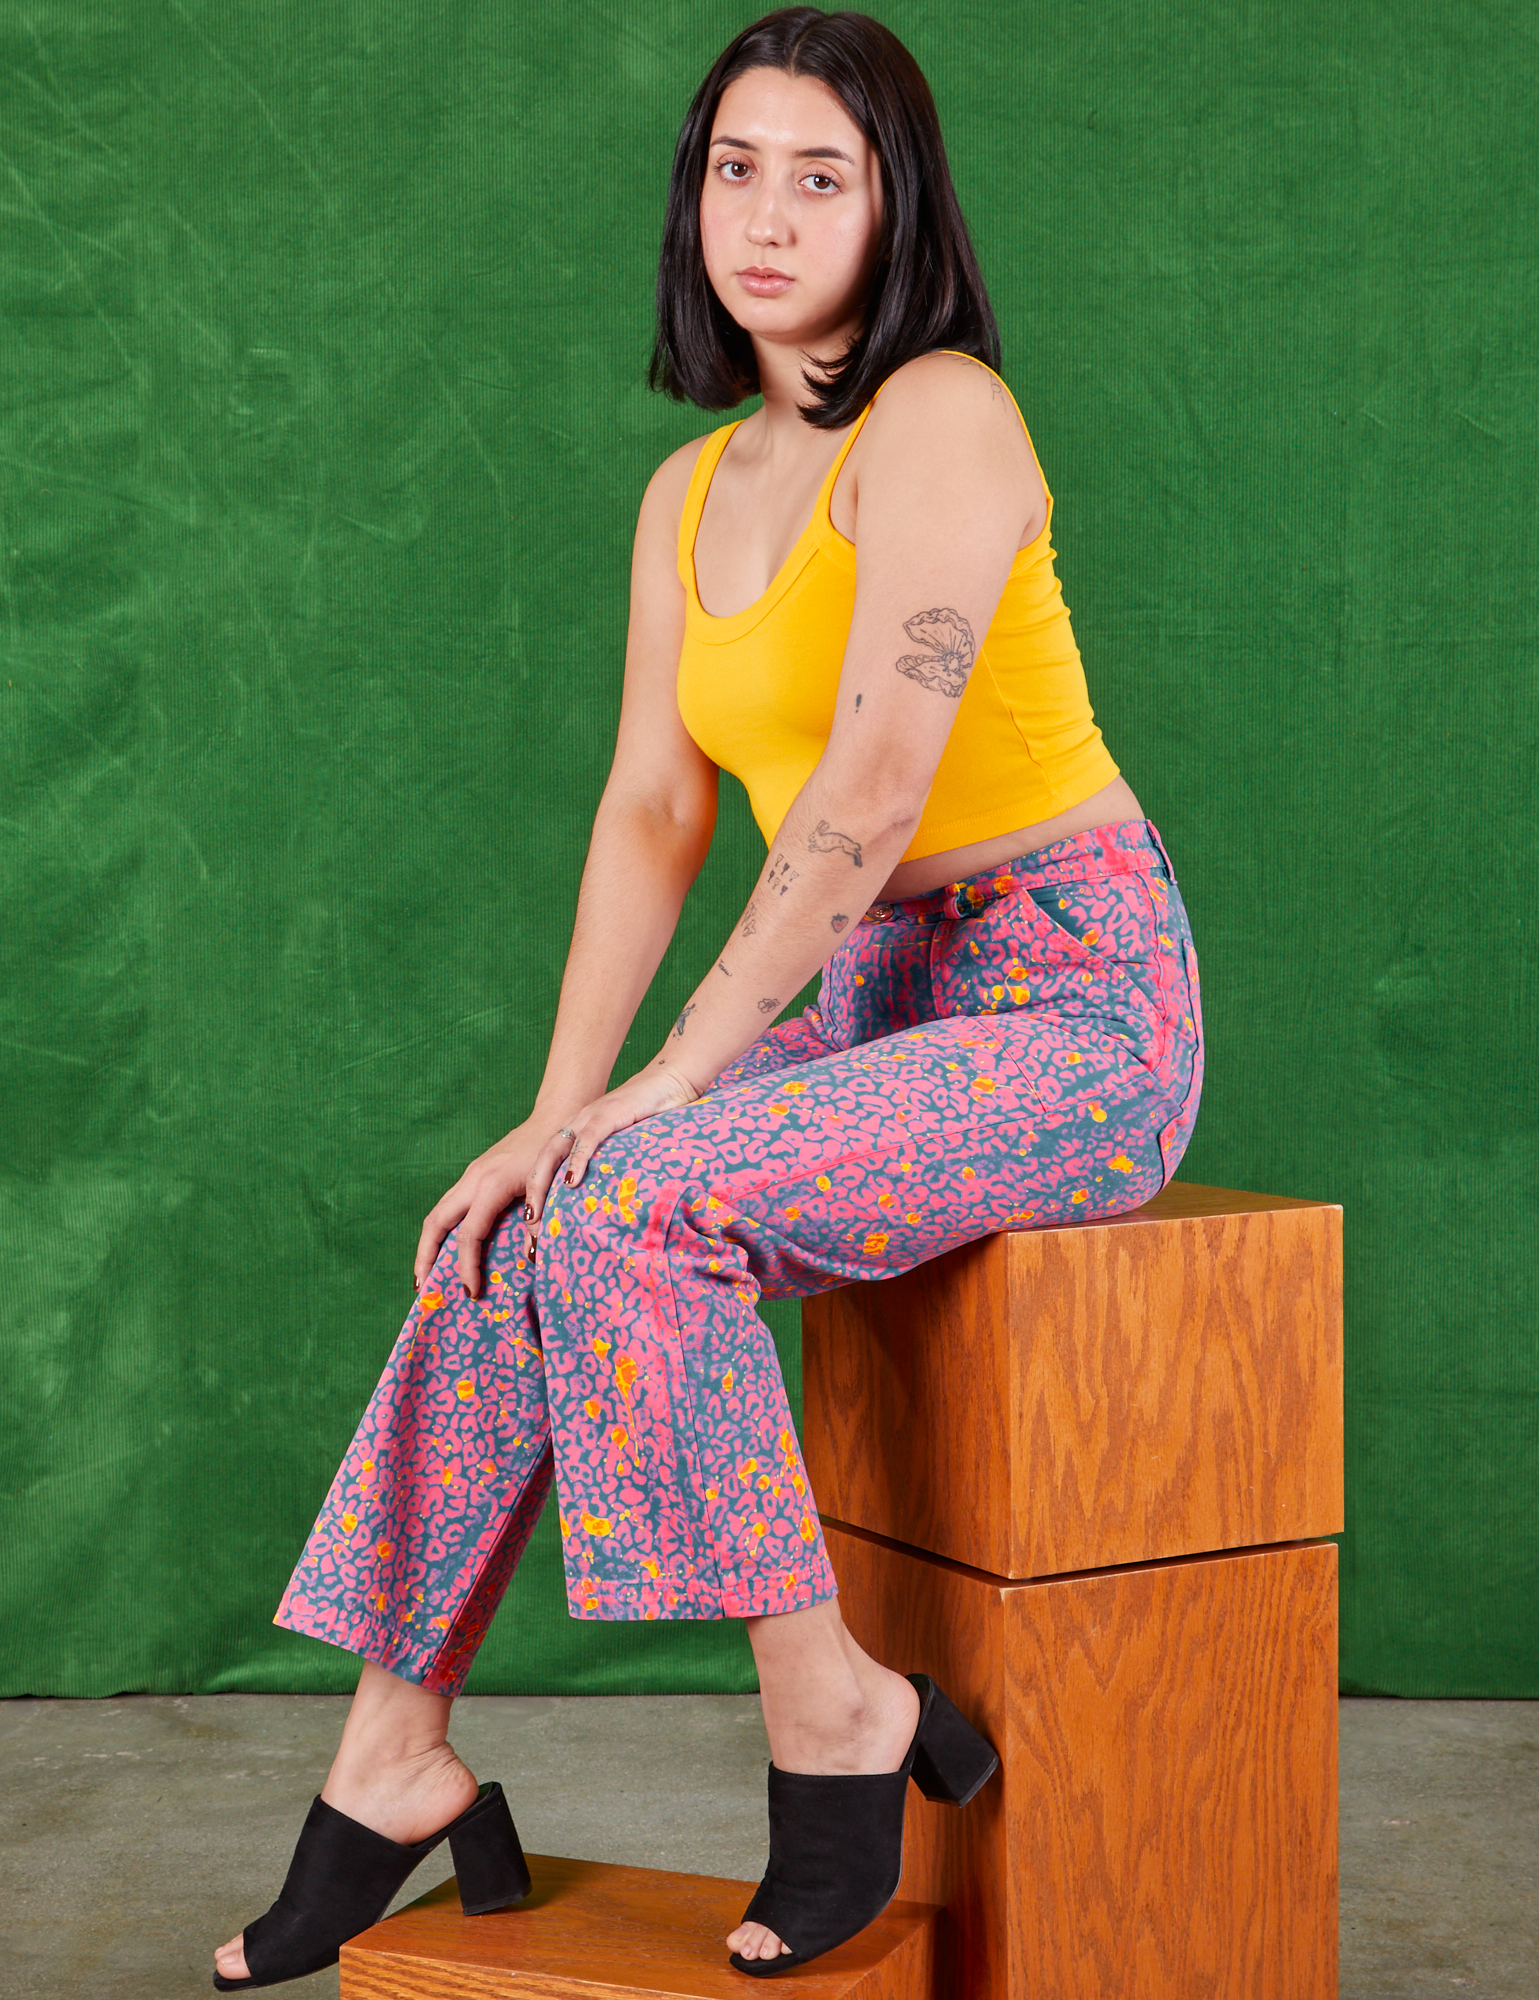 Work Pants in Electric Leopard and sunshine yellow Cami on Betty